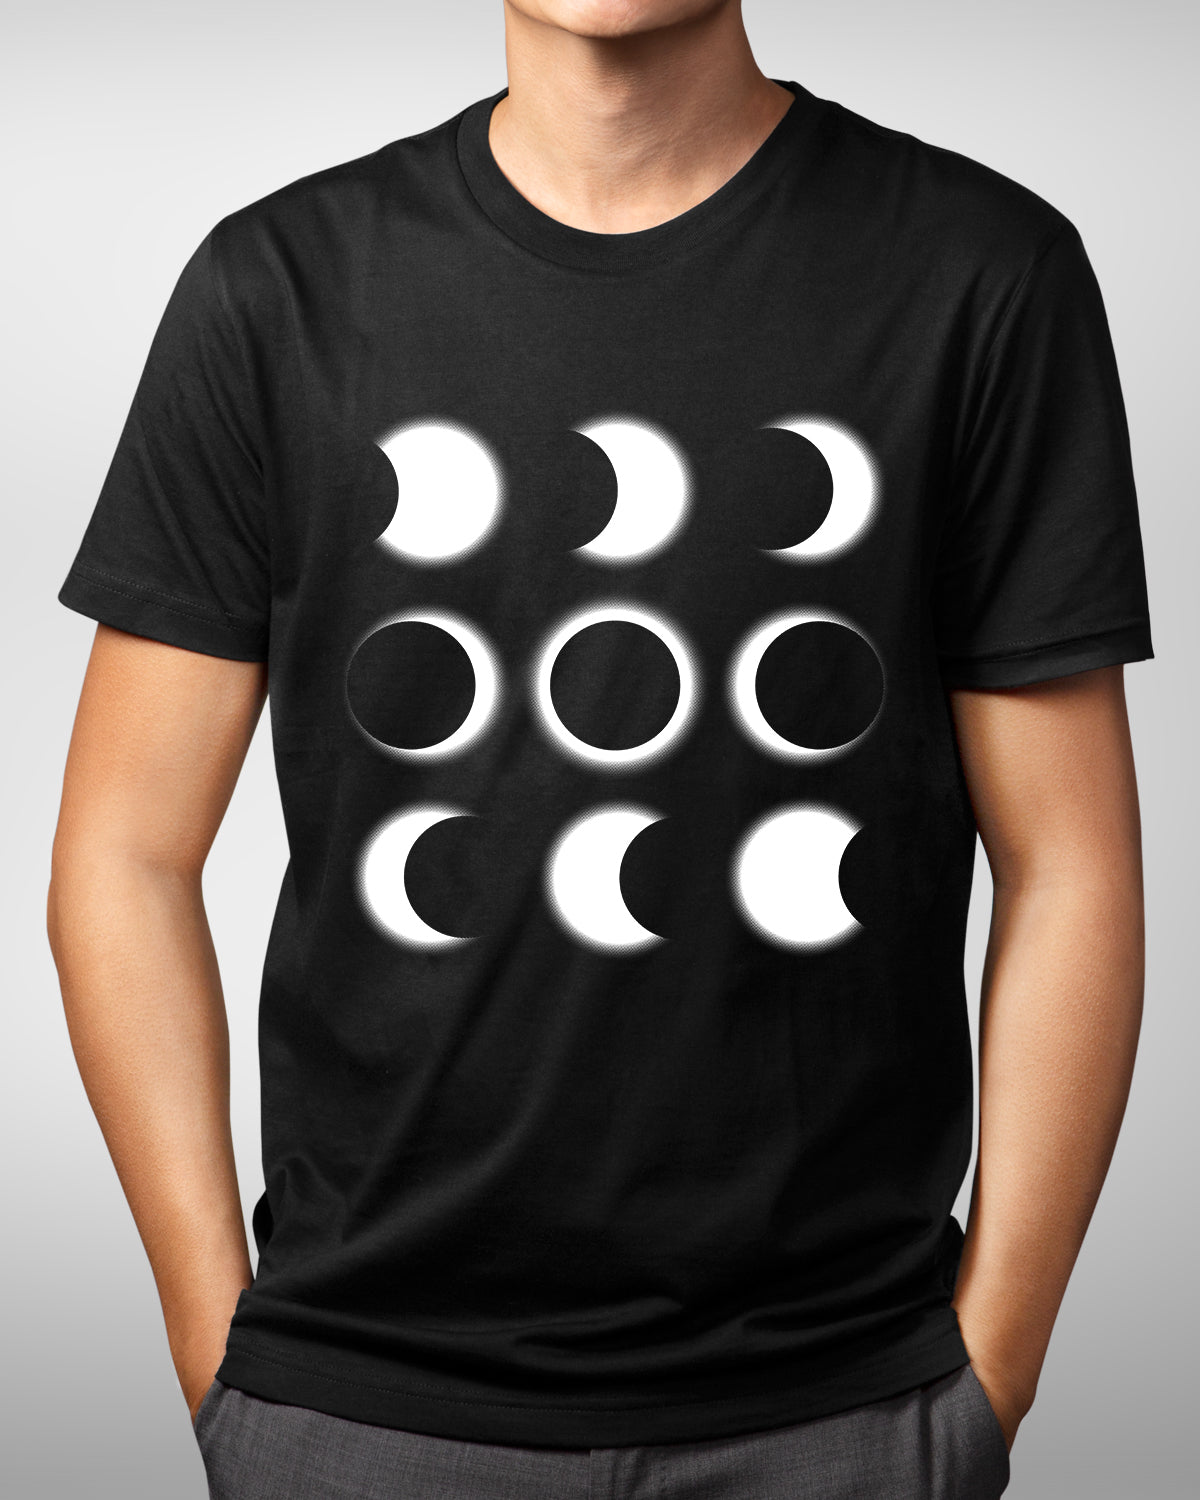 Phases of the Moon Shirt - Lunar Space and Astronomy Gift